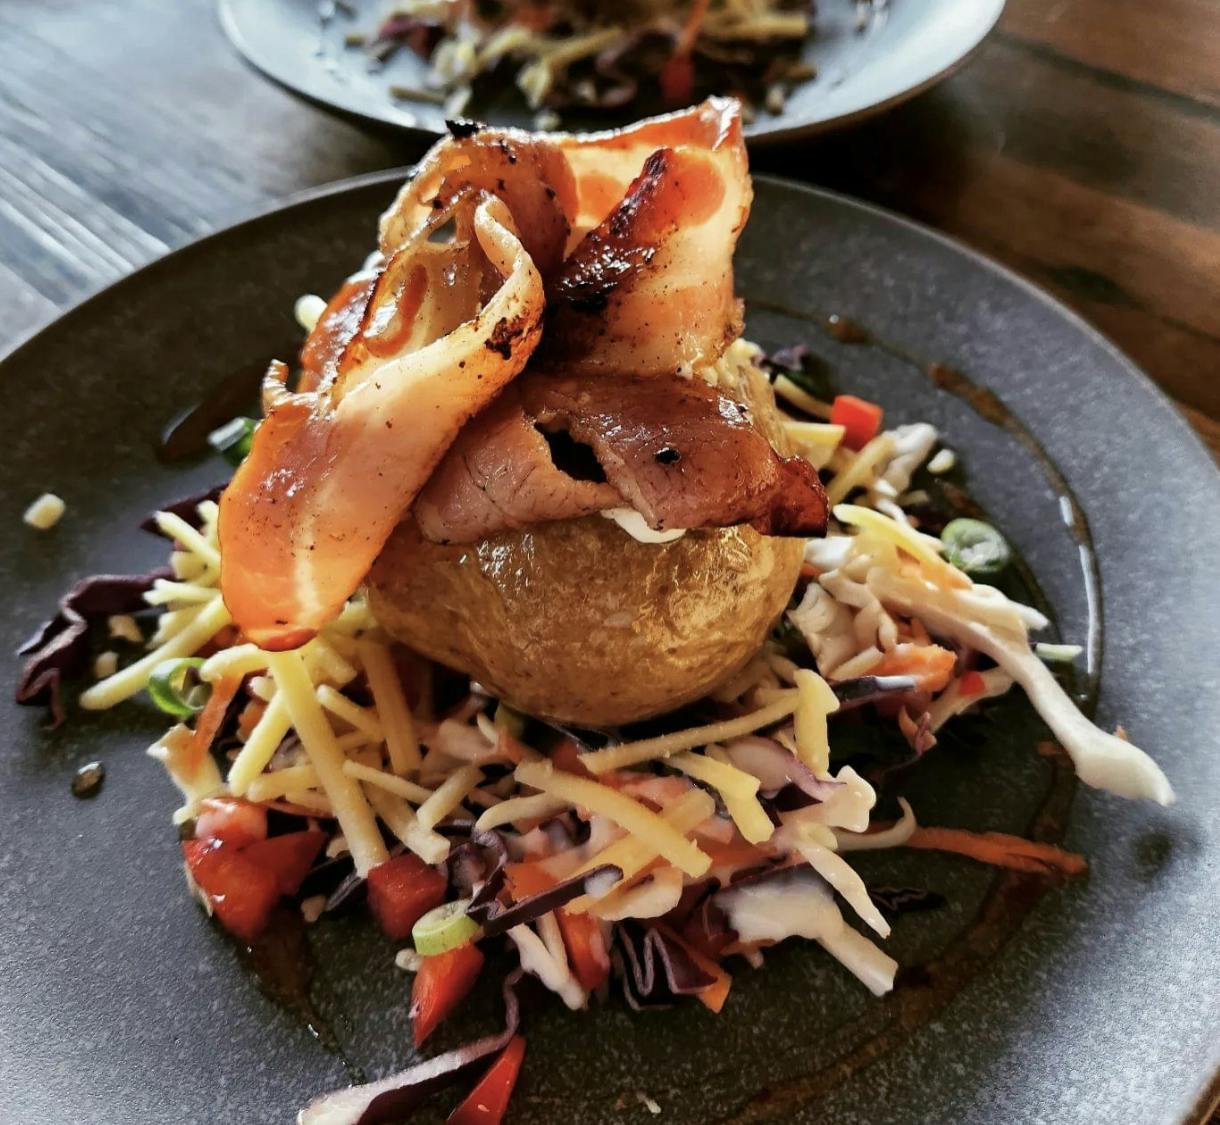 Baked potatoes are a house specialty at Yarram Coffee Palace